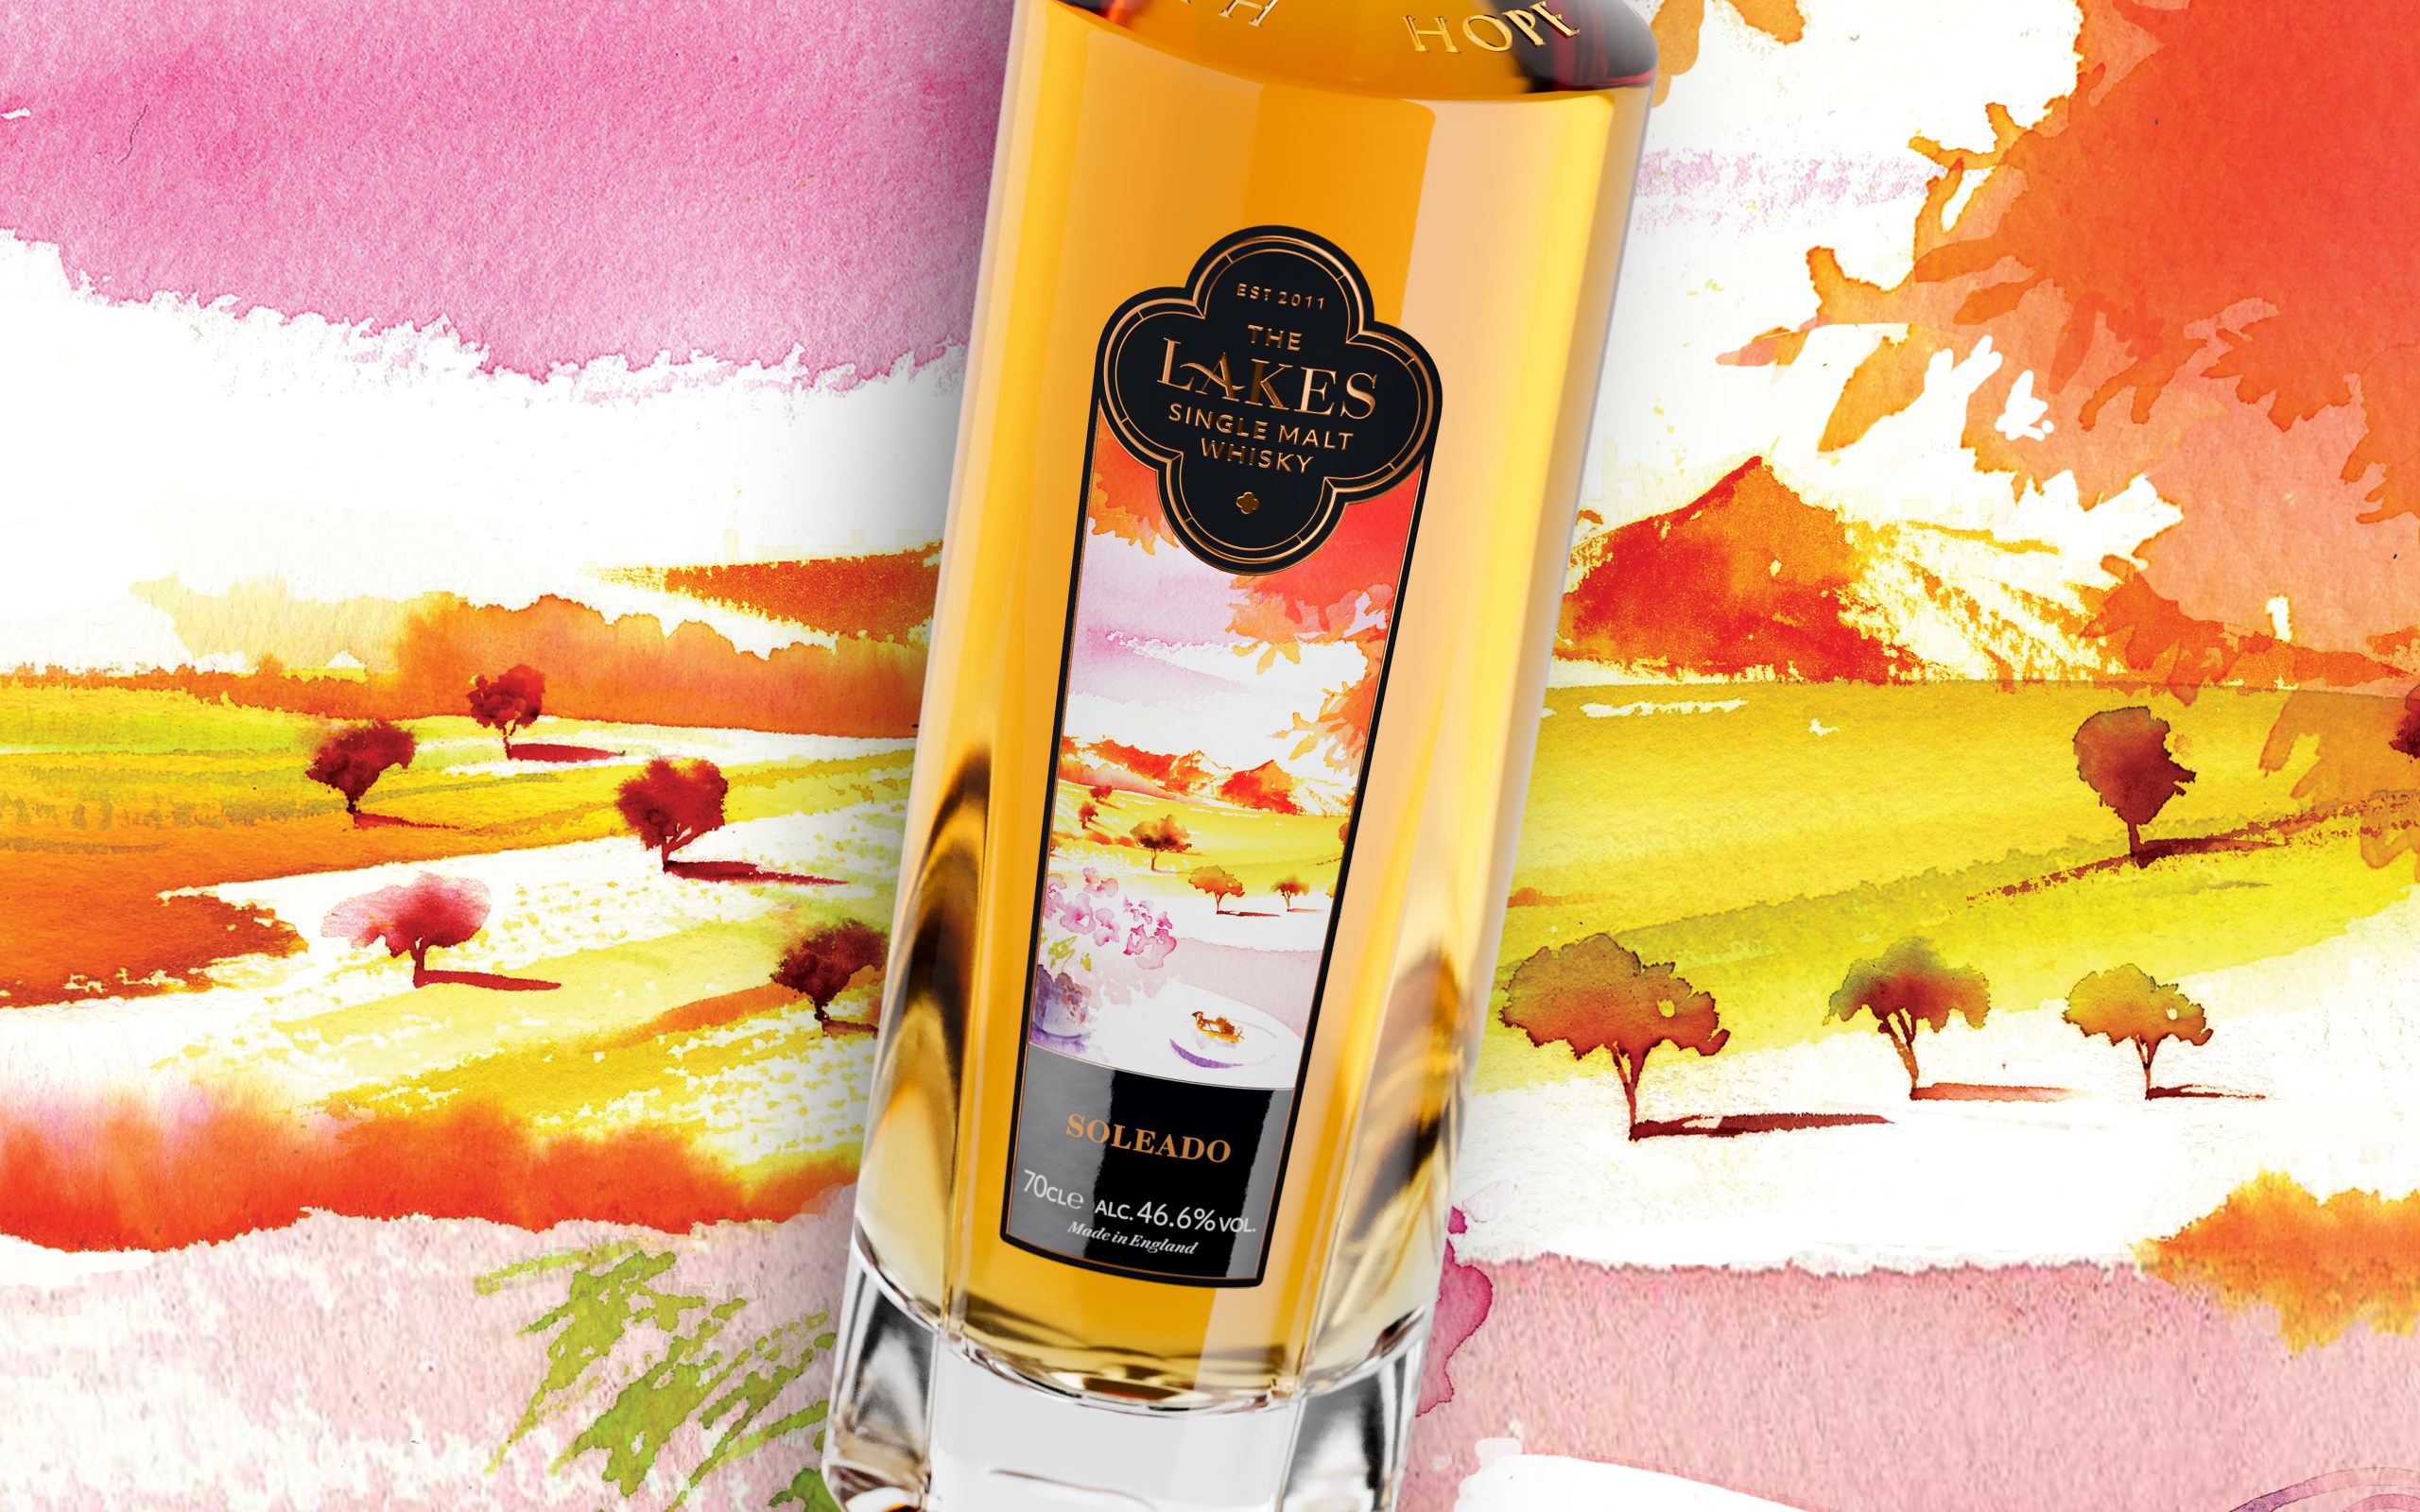 Illustration Projects Packaging Lakes Single Malt Whisky Soleado